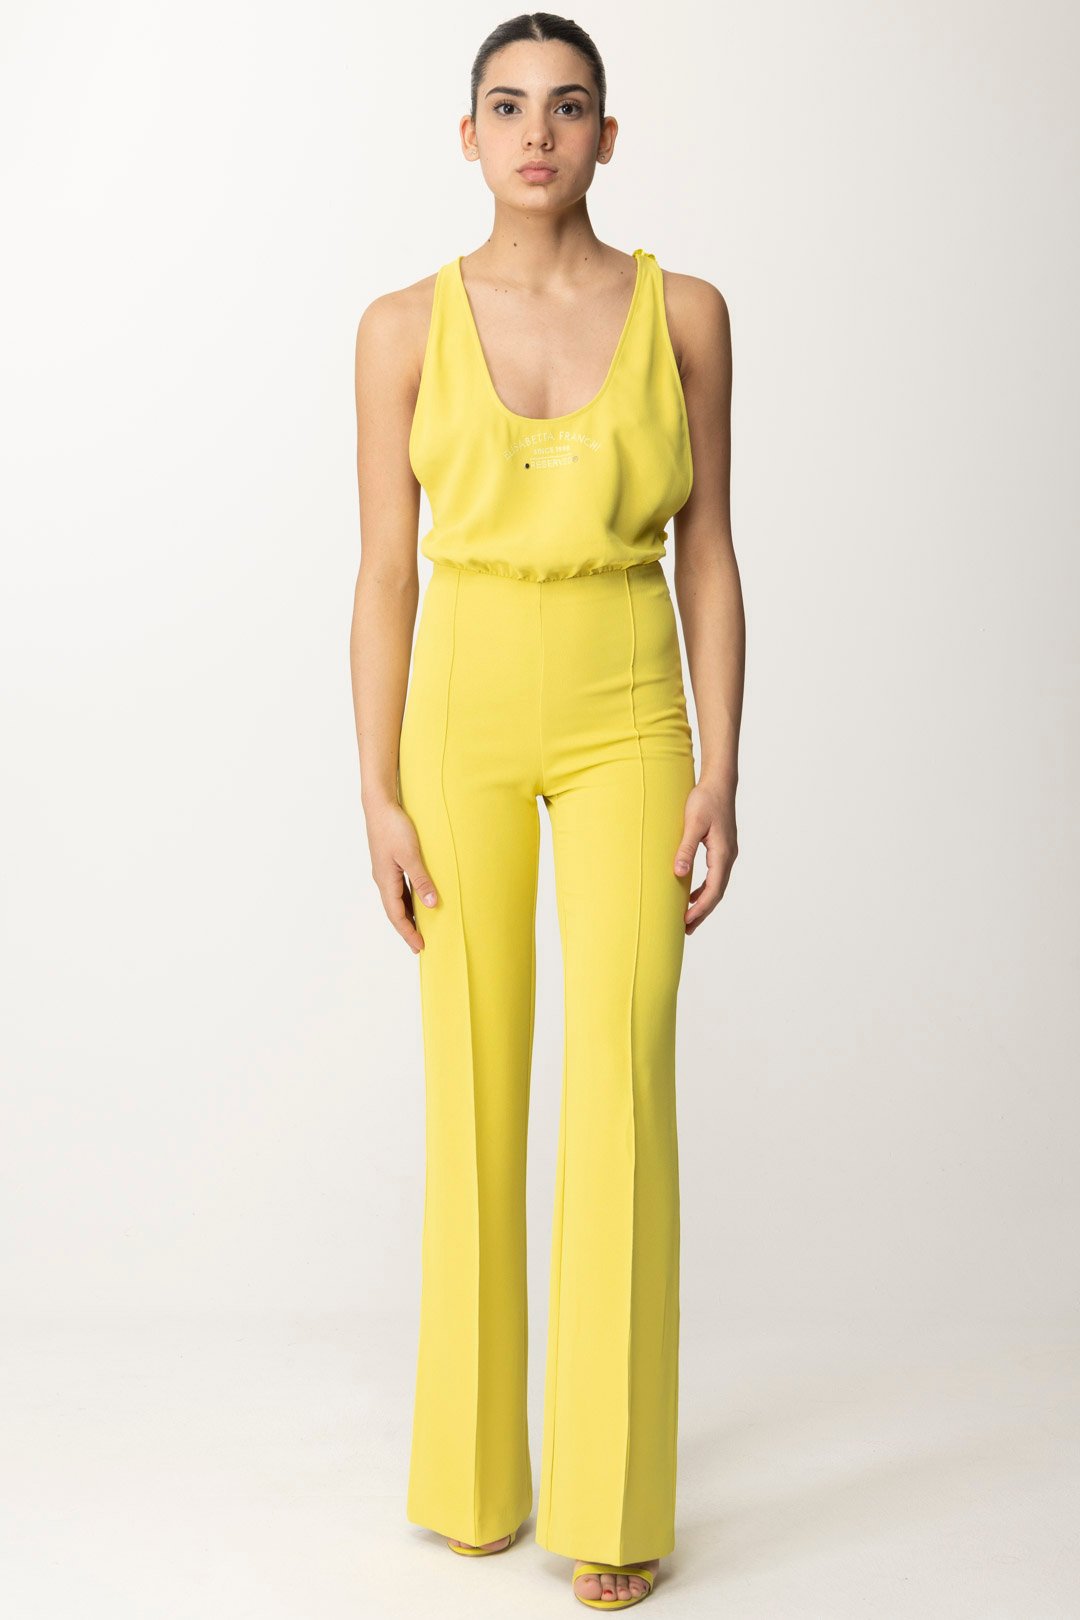 Preview: Elisabetta Franchi Reserved Logo Embroidered Jumpsuit CEDRO